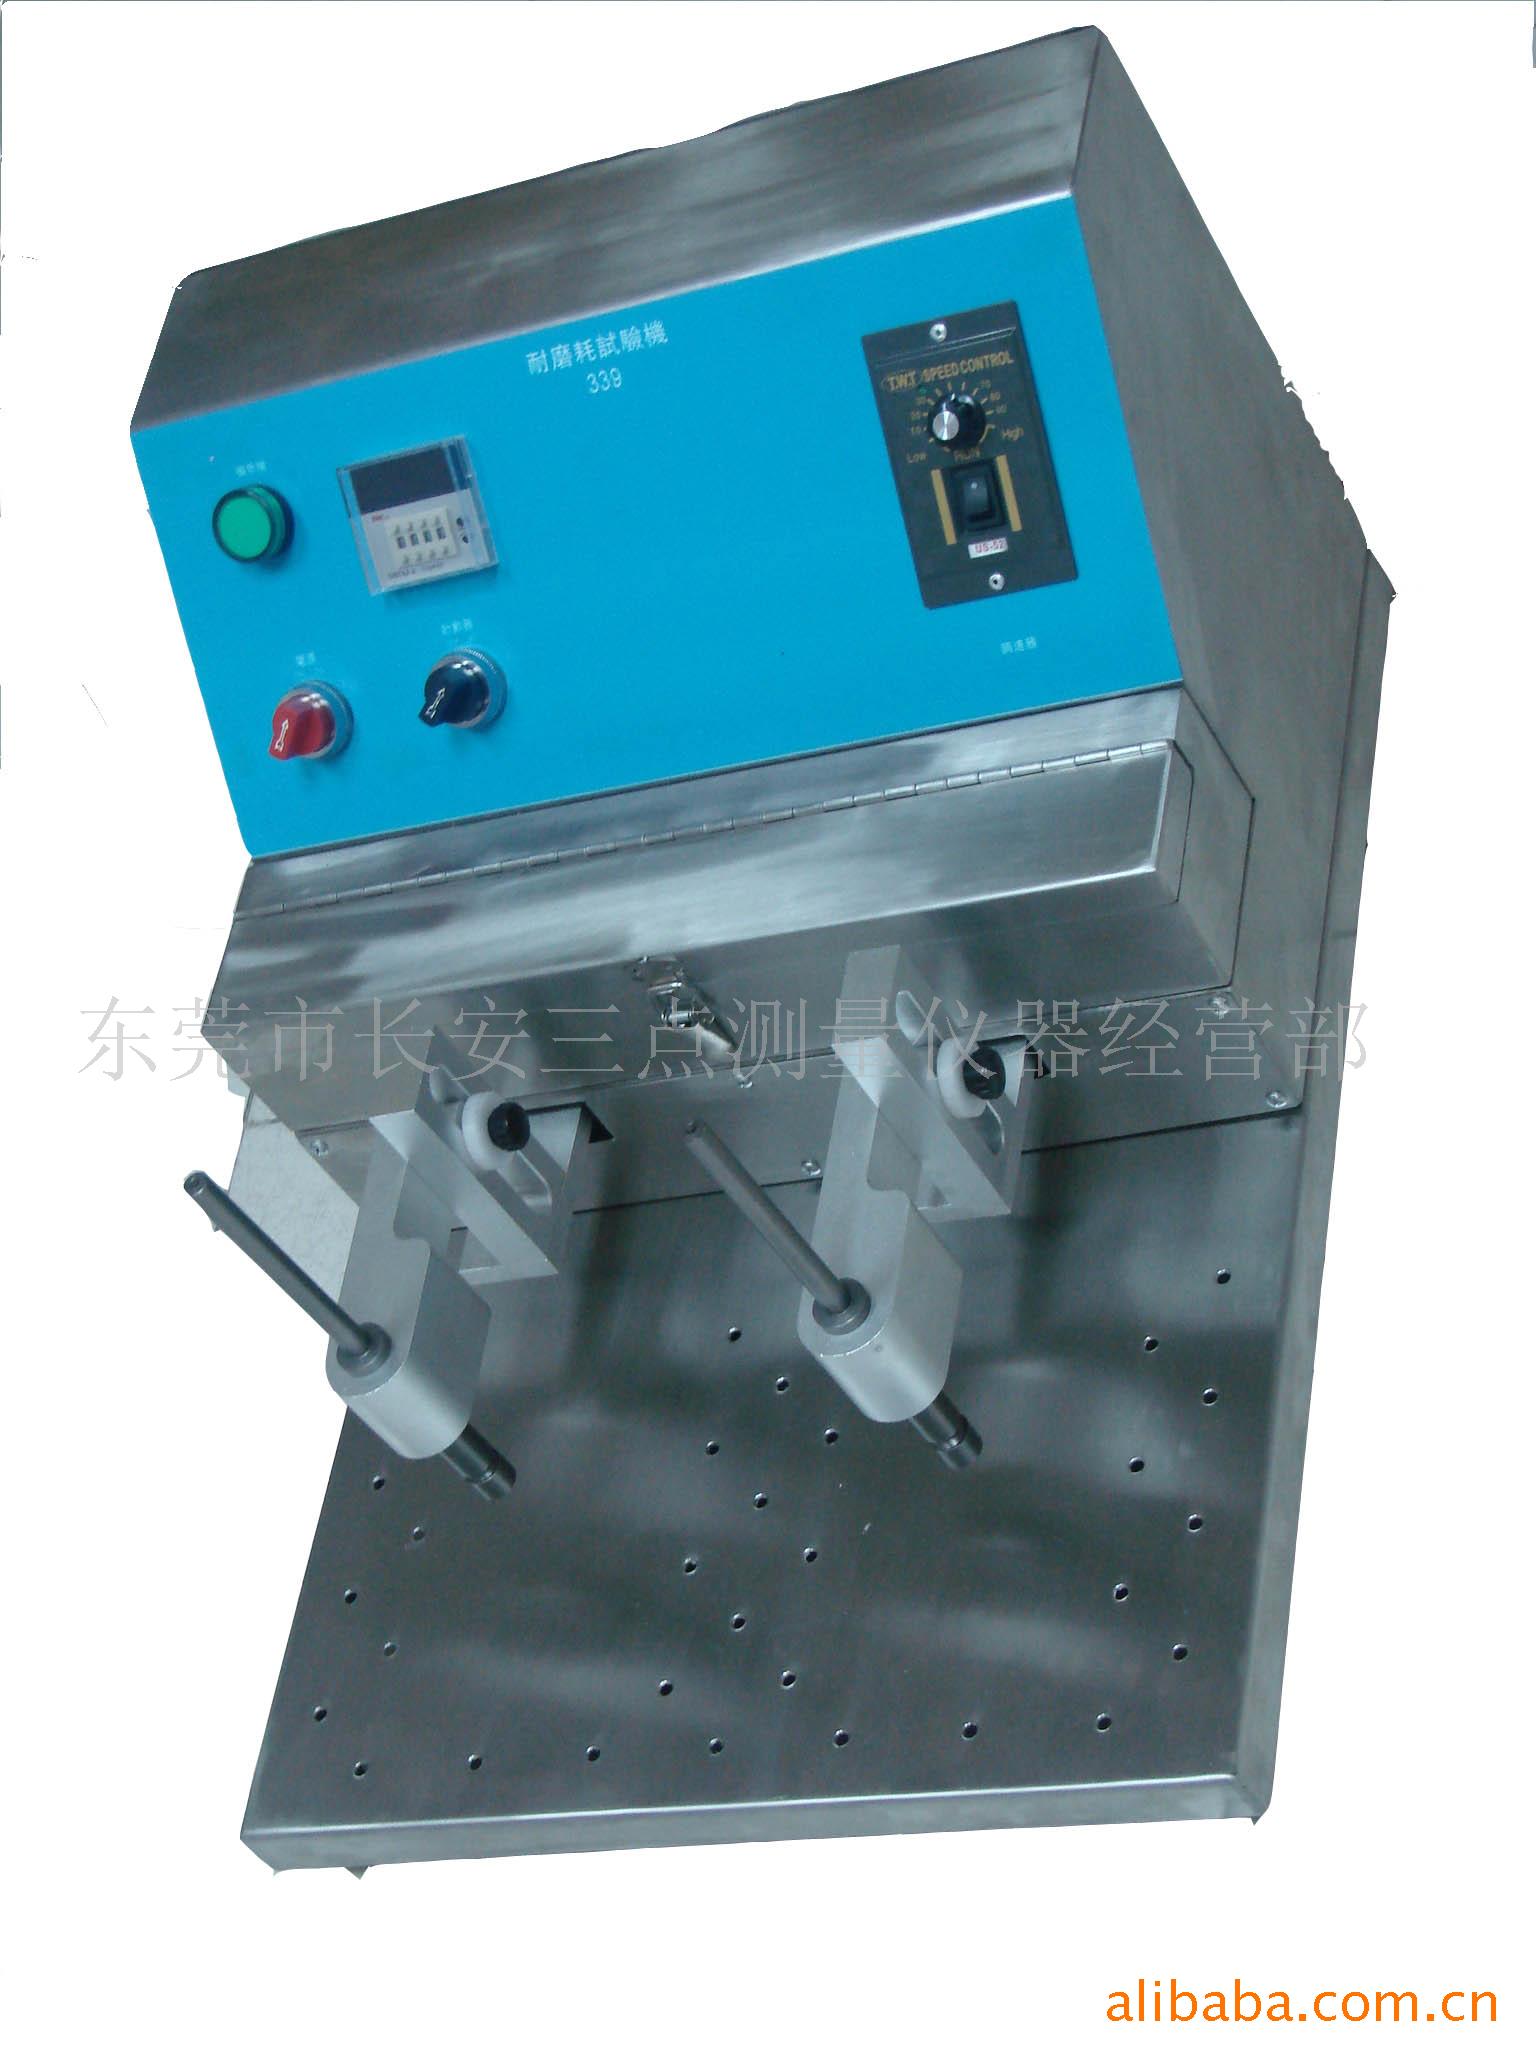 Manufactor supply rubber alcohol wear-resisting Tester wear-resisting Tester Precise Tester